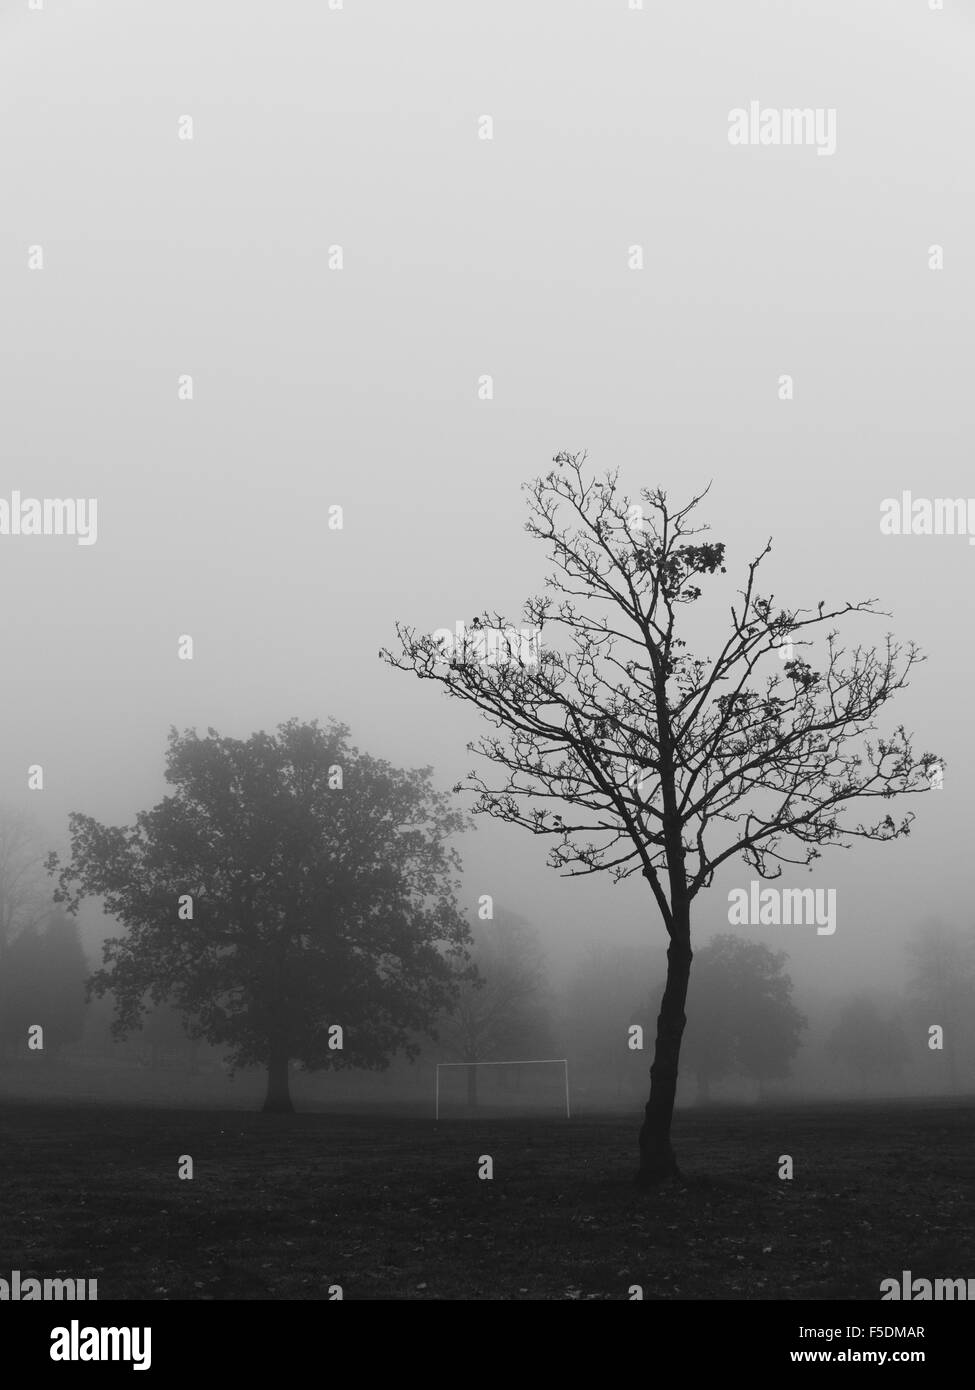 Foggy day at the park, with football goalposts in the scene. Stock Photo